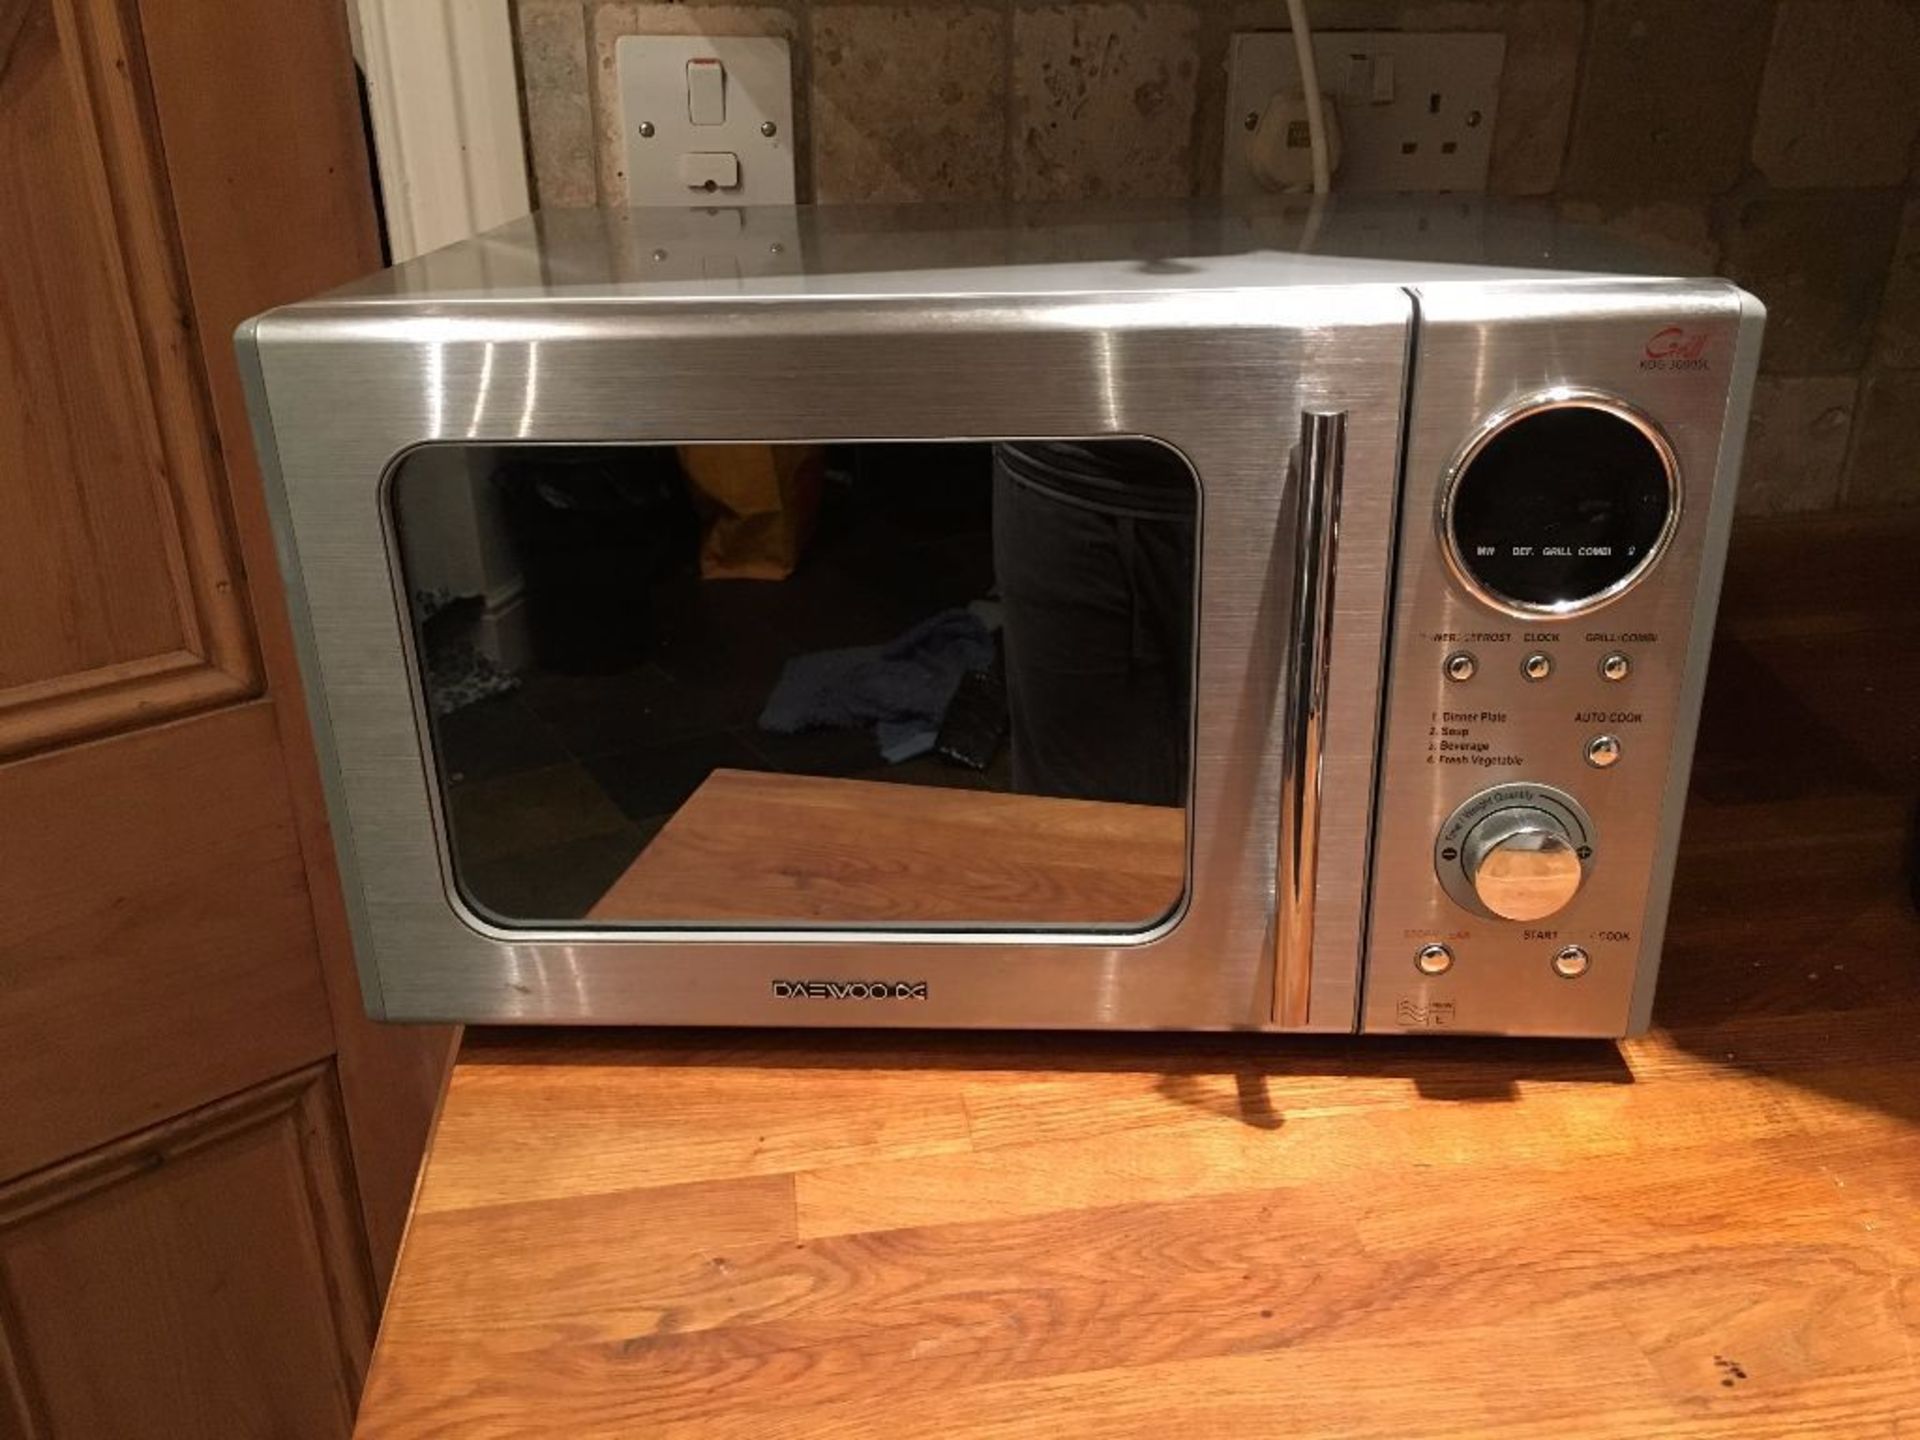 Daewoo KOG3000SL stainless steel 20l microwave oven and grill 1200W (s/n TM097E20400622)